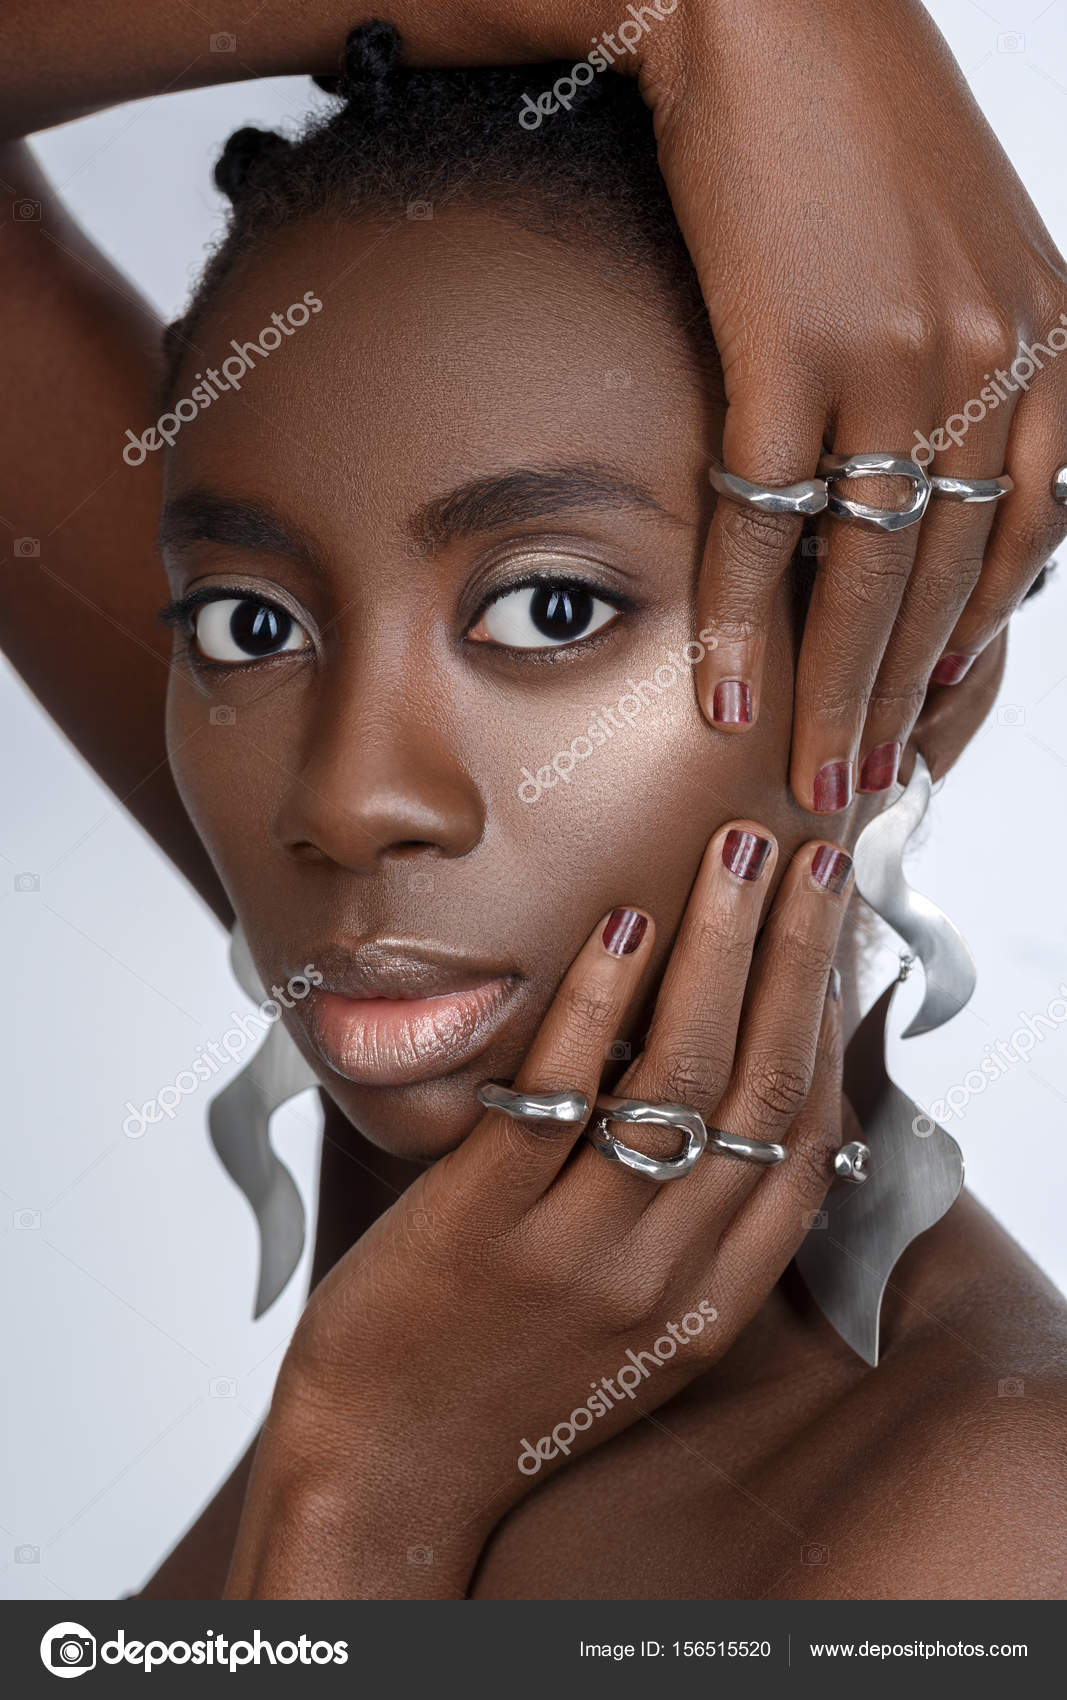 Silicone Rings For Women | Groove Life